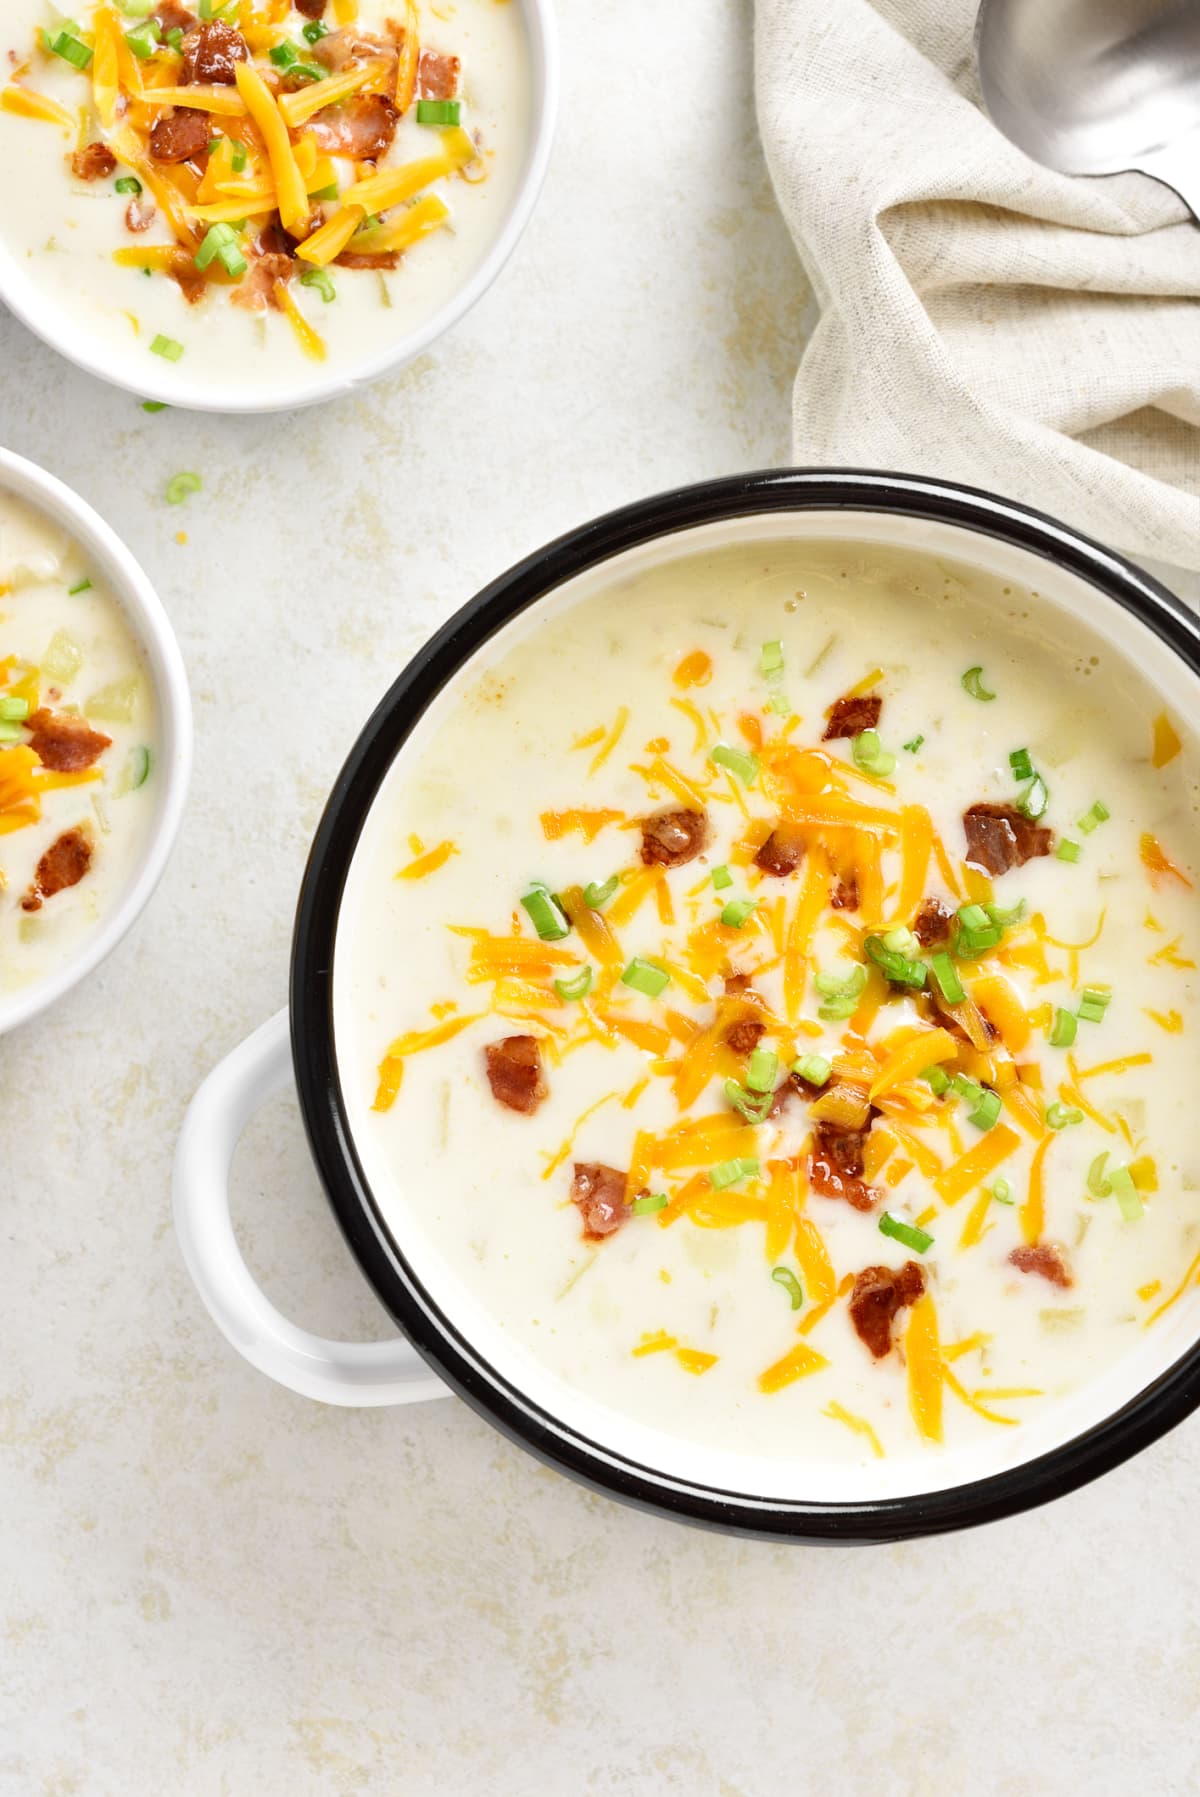 Creamy potato soup with bacon and cheddar cheese in bowl and pot on light stone background